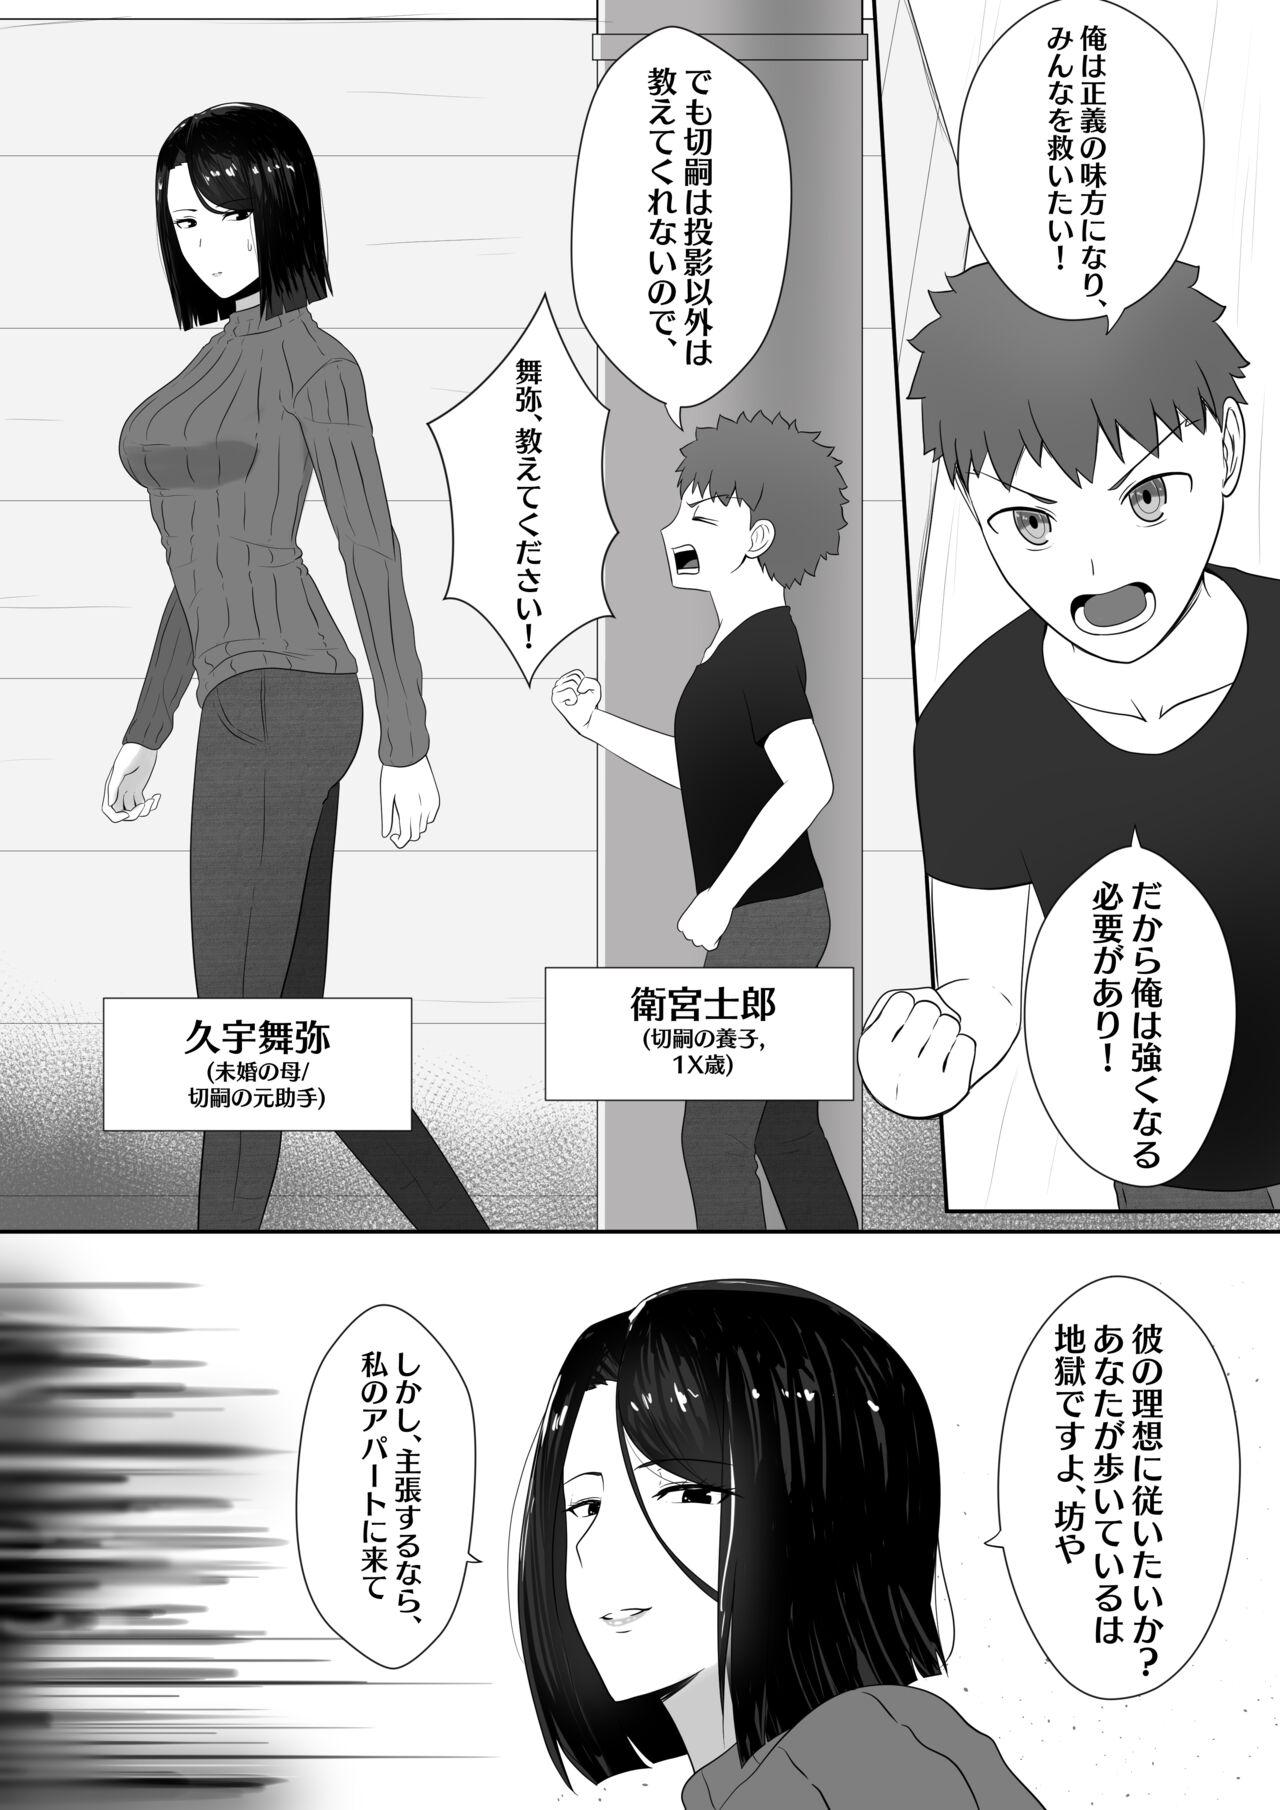 Exposed 舞弥先生との秘密の調教 - Fate zero Awesome - Page 2